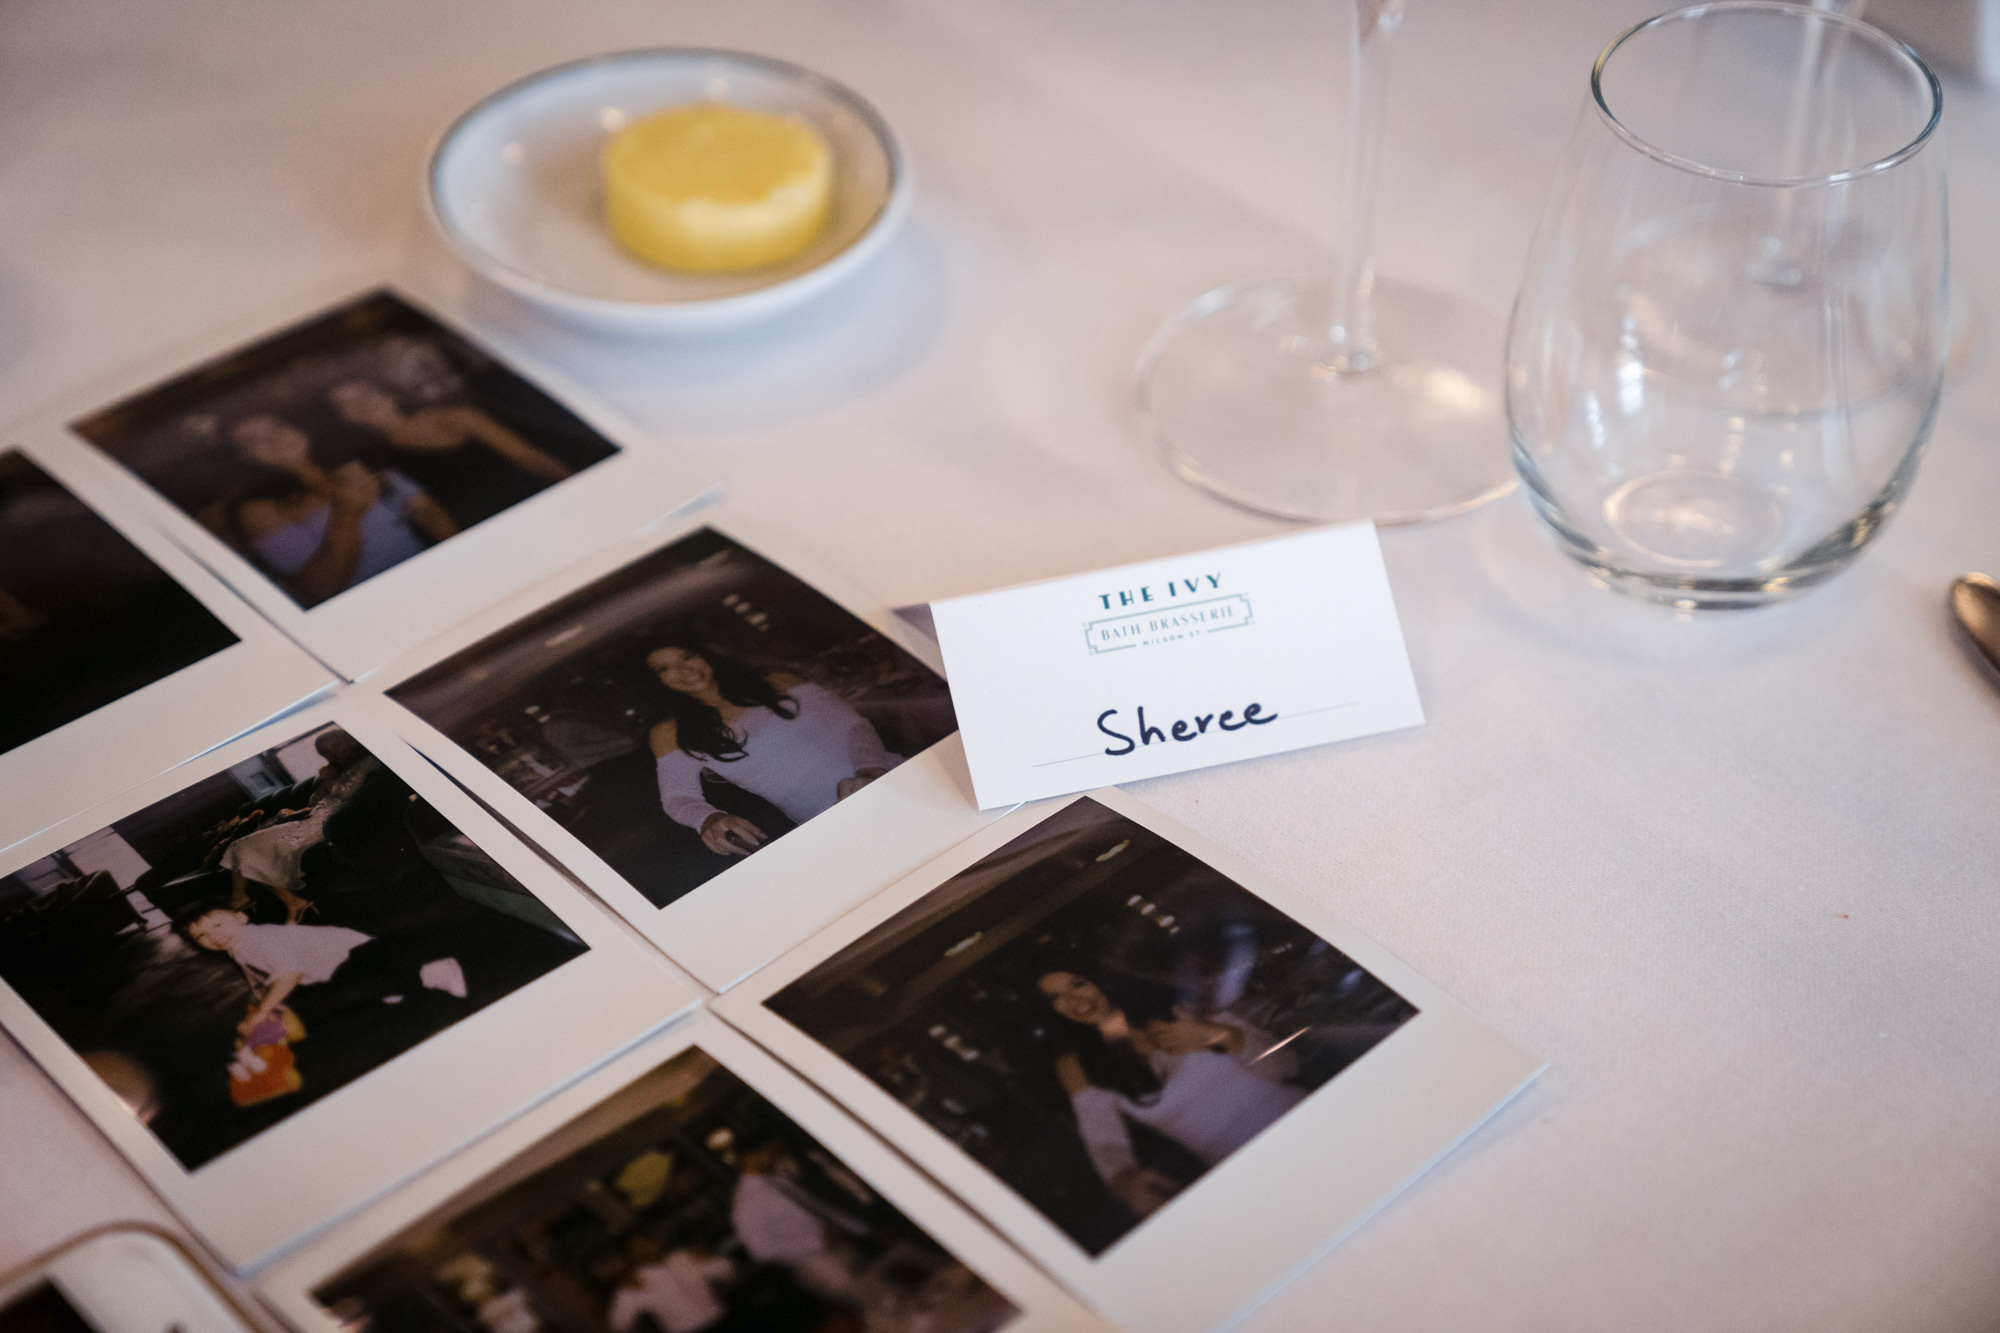 polaroid photos of wedding guests taken by each other